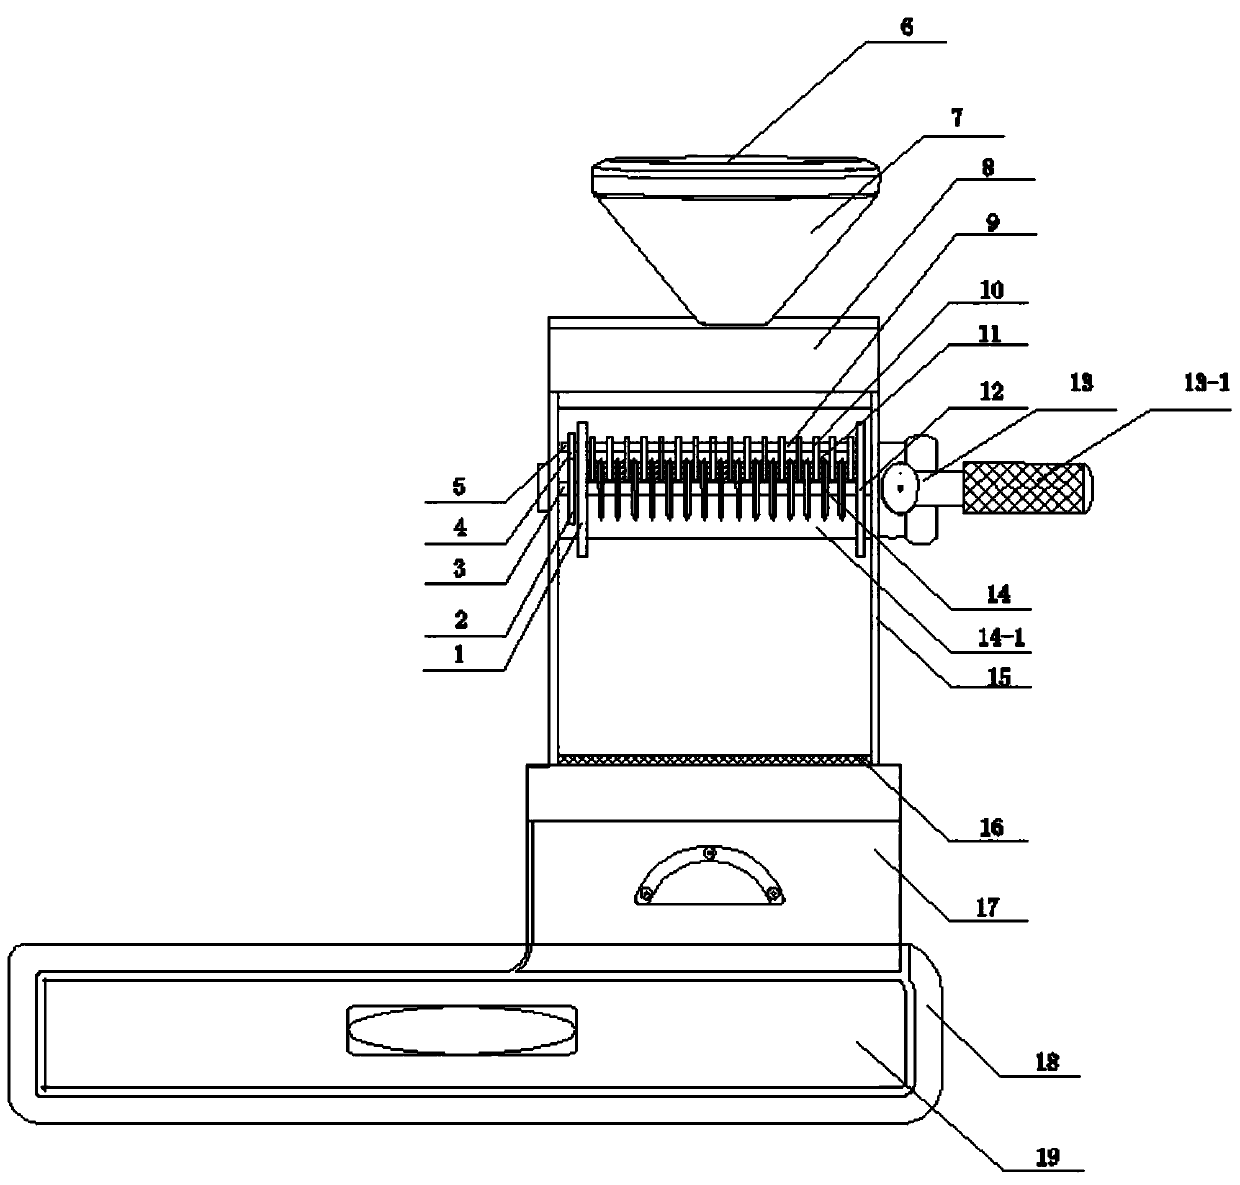 Grinding device suitable for frozen tissue